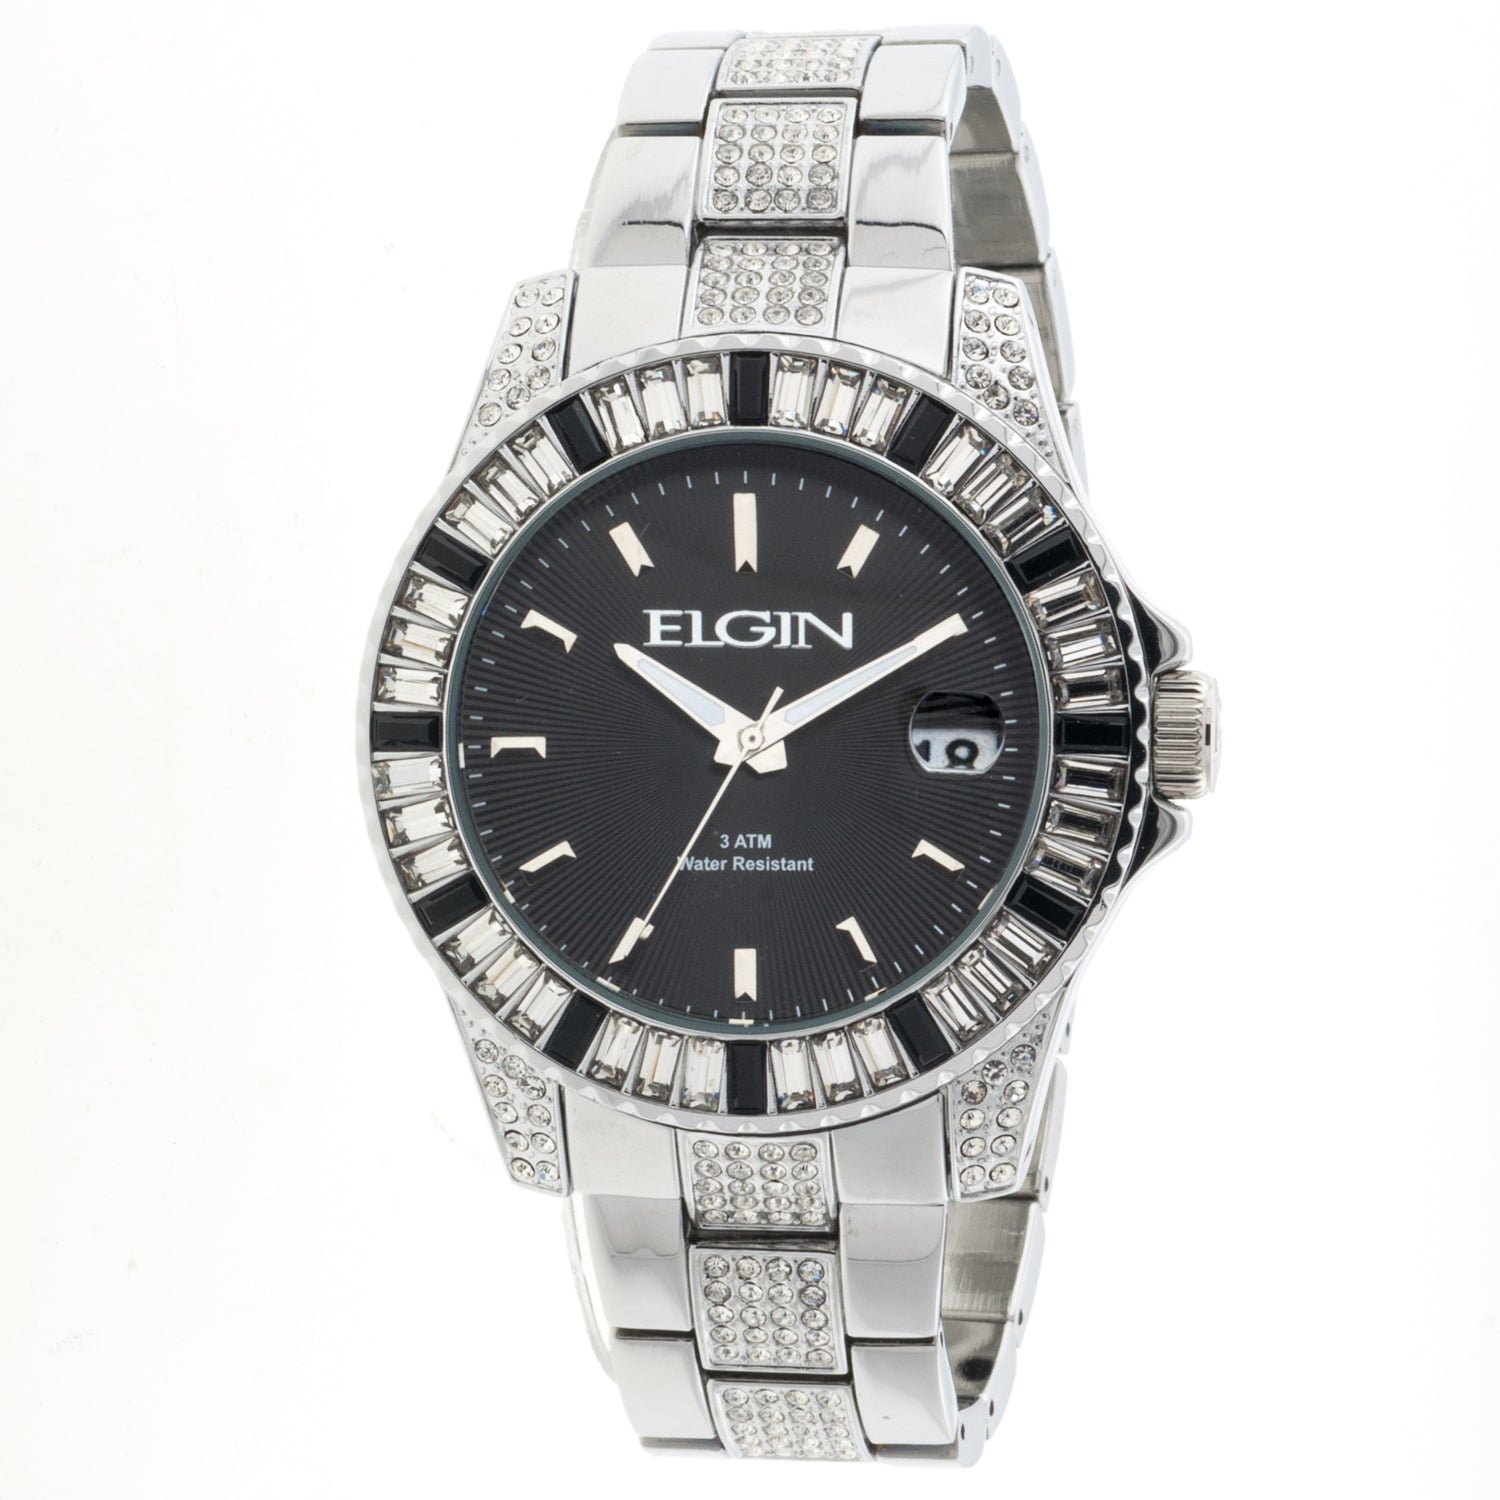 Model: Elgin Men's Stainless Steel Watch With Swarovski Crystals and Gift Box